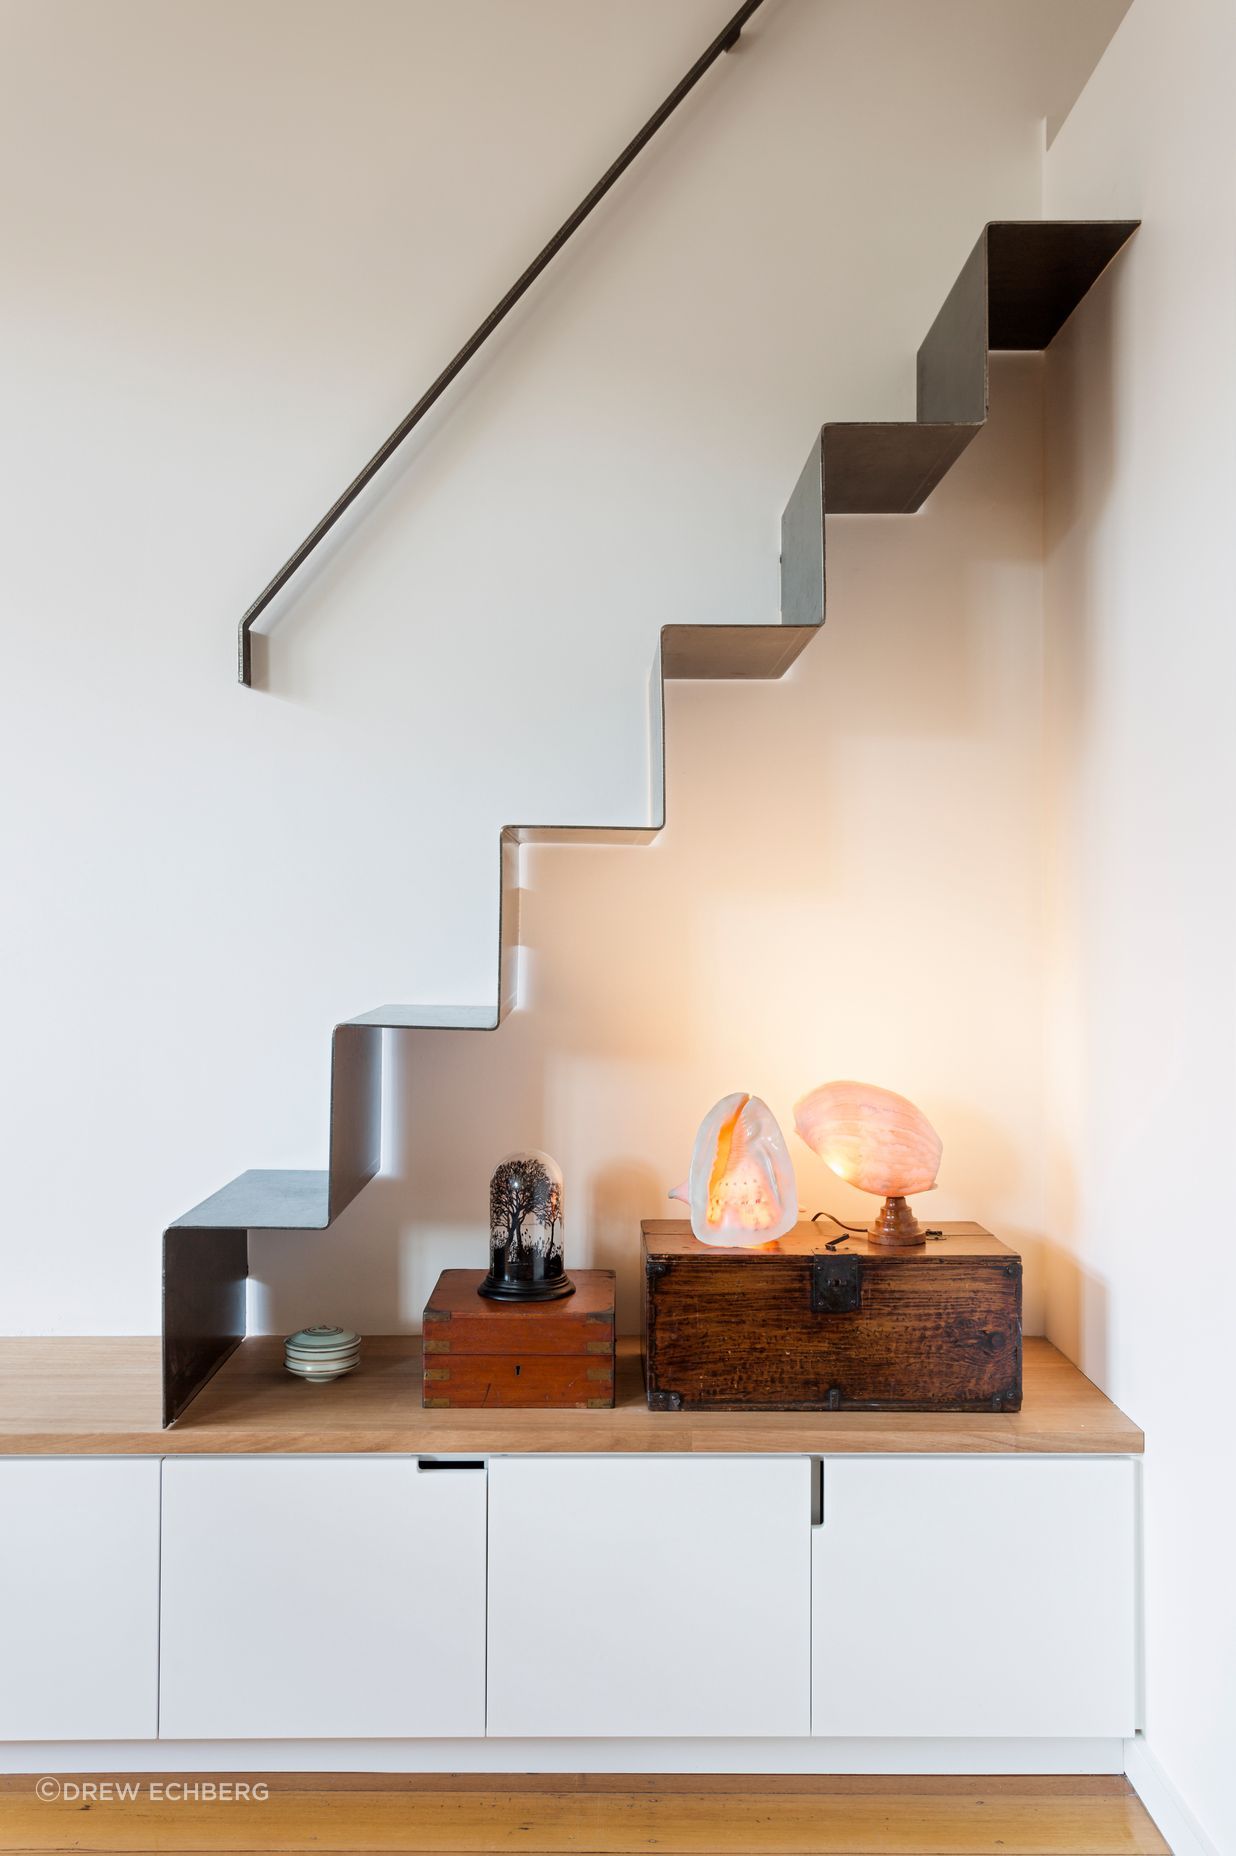 A folded metal stair gives good access to a storage area